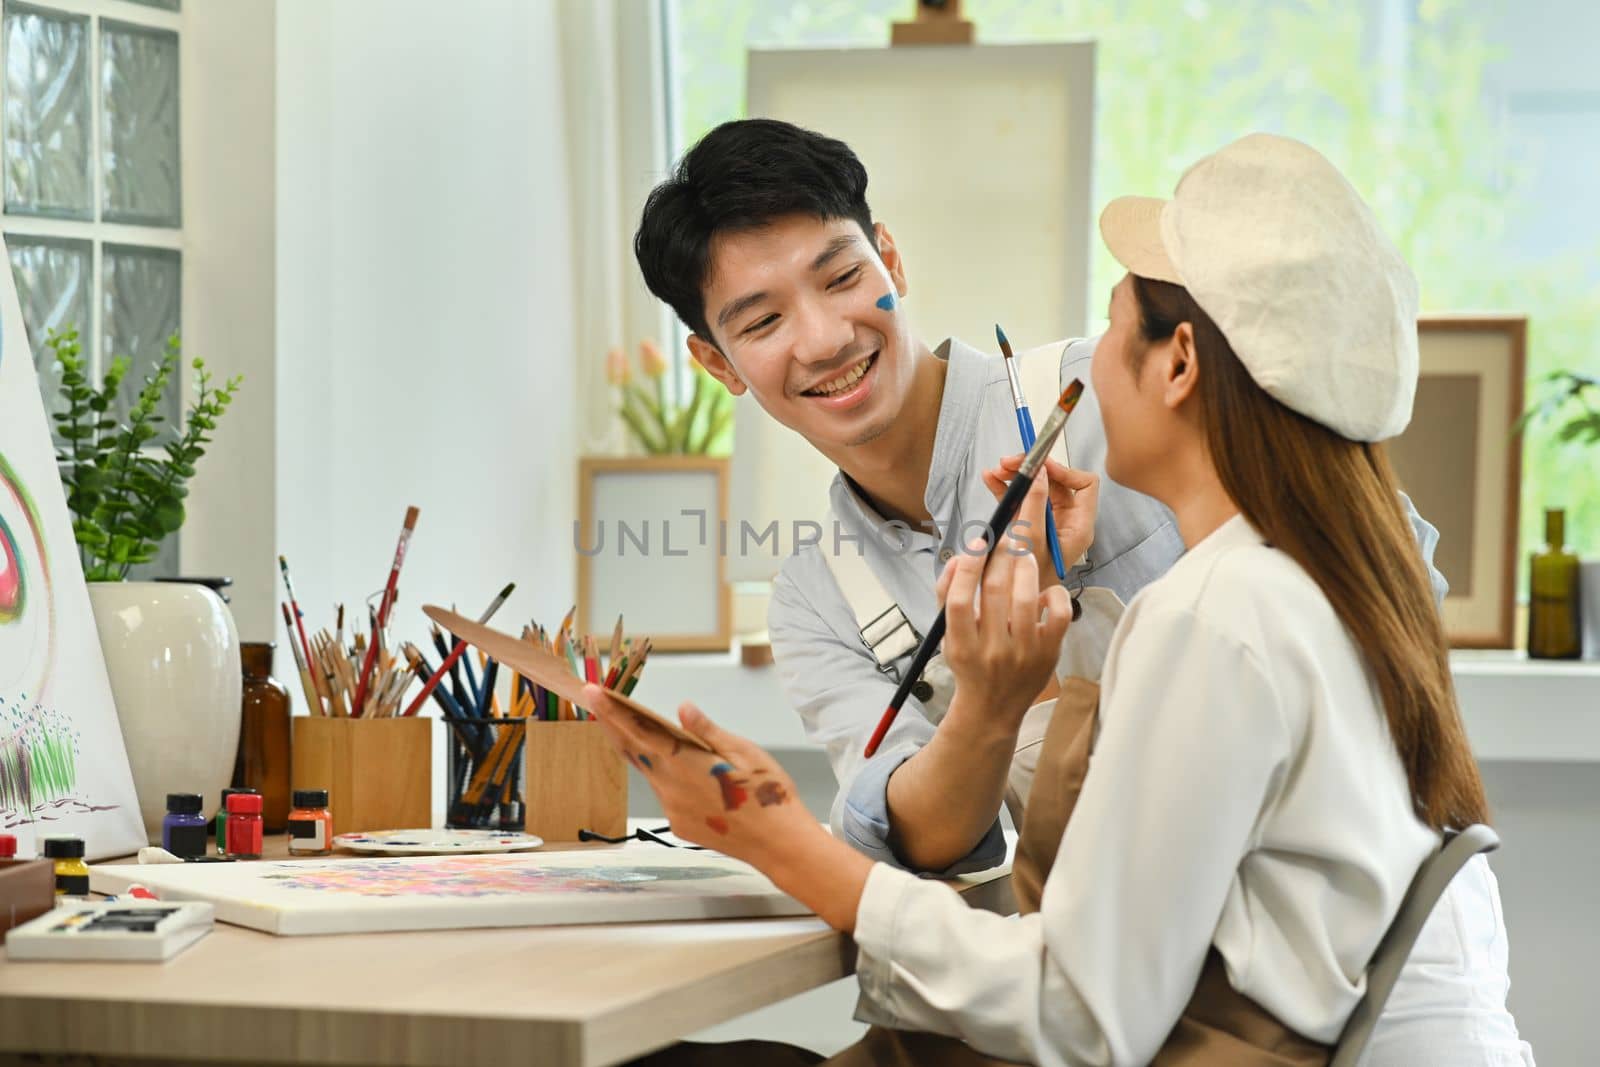 Asian man painting face his girlfriend during painting in at art studio. Leisure activity, creative hobby and art concept by prathanchorruangsak